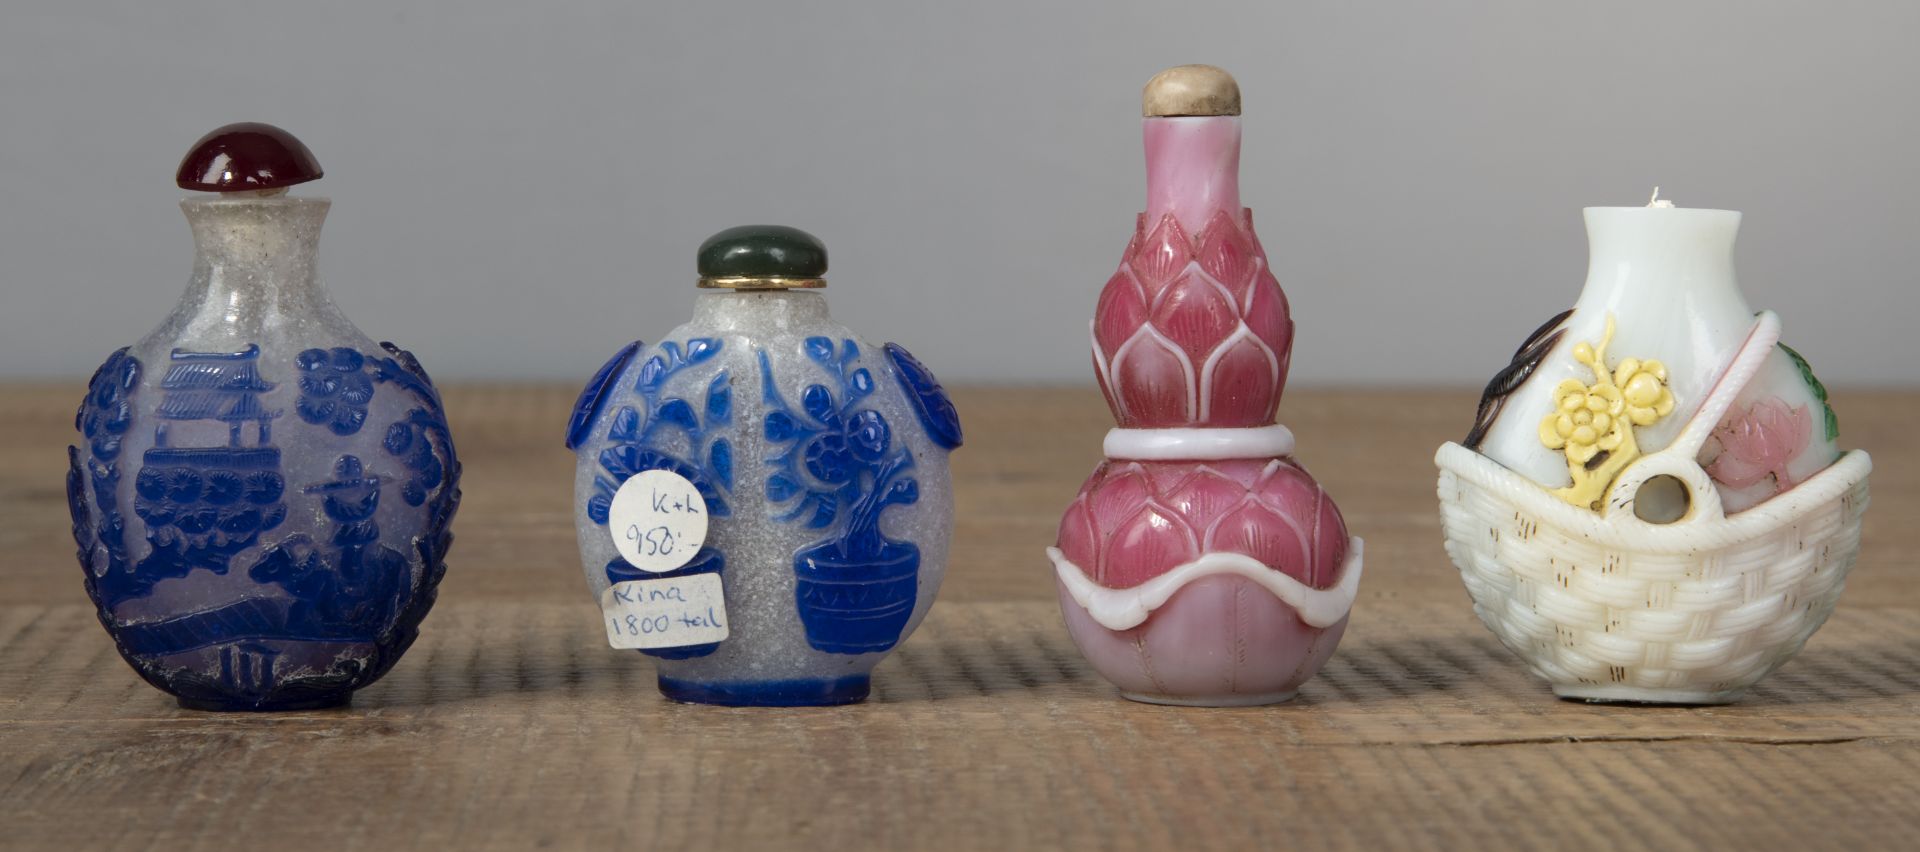 FOUR PEKING GLASS SNUFF BOTTLES WITH POLYCHOROME FLORAL AND LANDSCAPE DECORATION, PARTLY WITH BLUE - Image 2 of 4